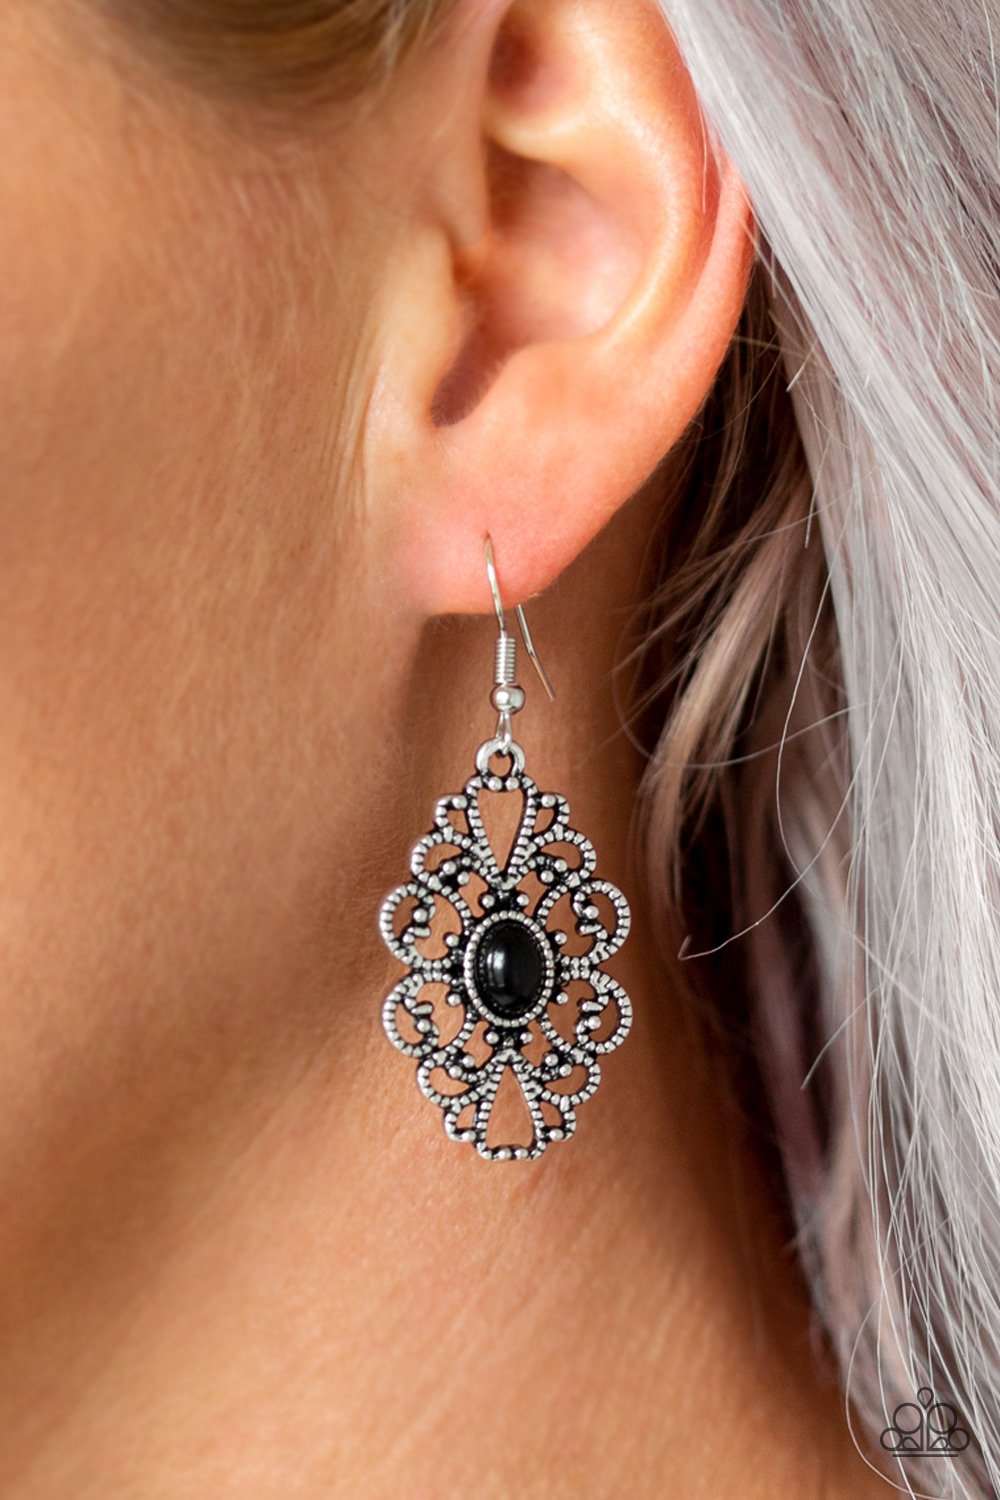 Over the POP-black-Paparazzi earrings